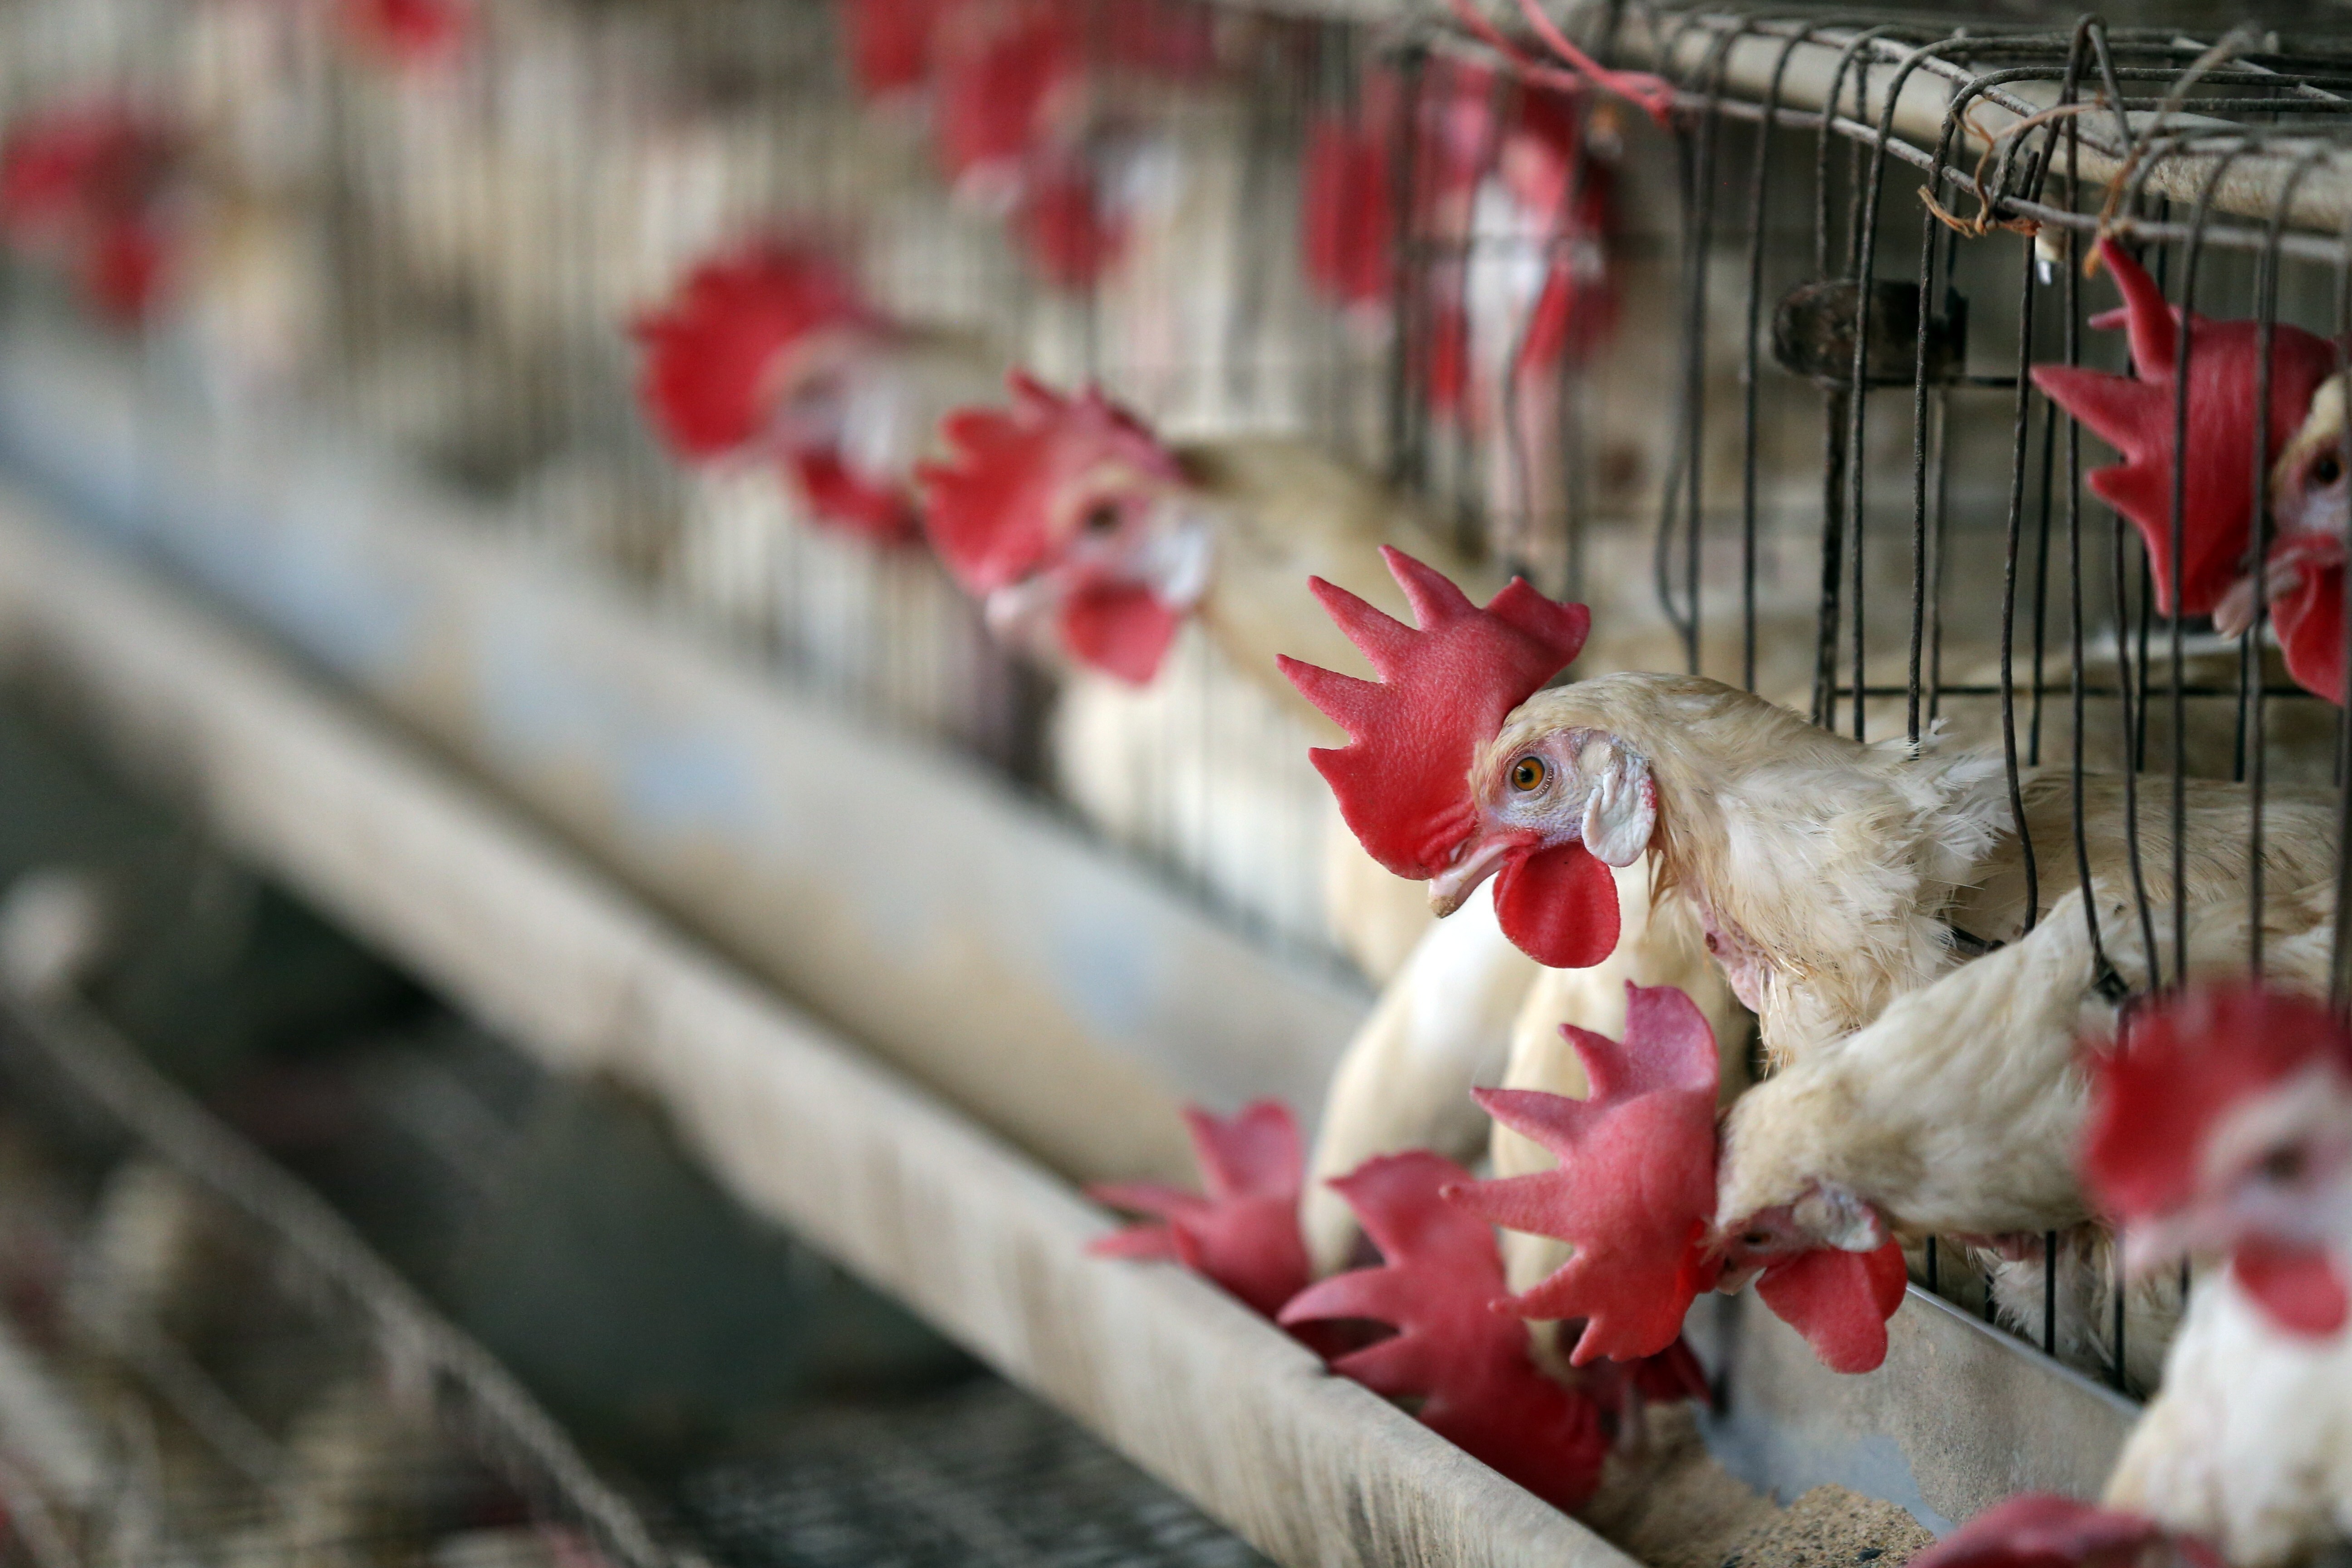 Two strains of bird flu have been detected in dozens of countries. Photo: EPA-EFE